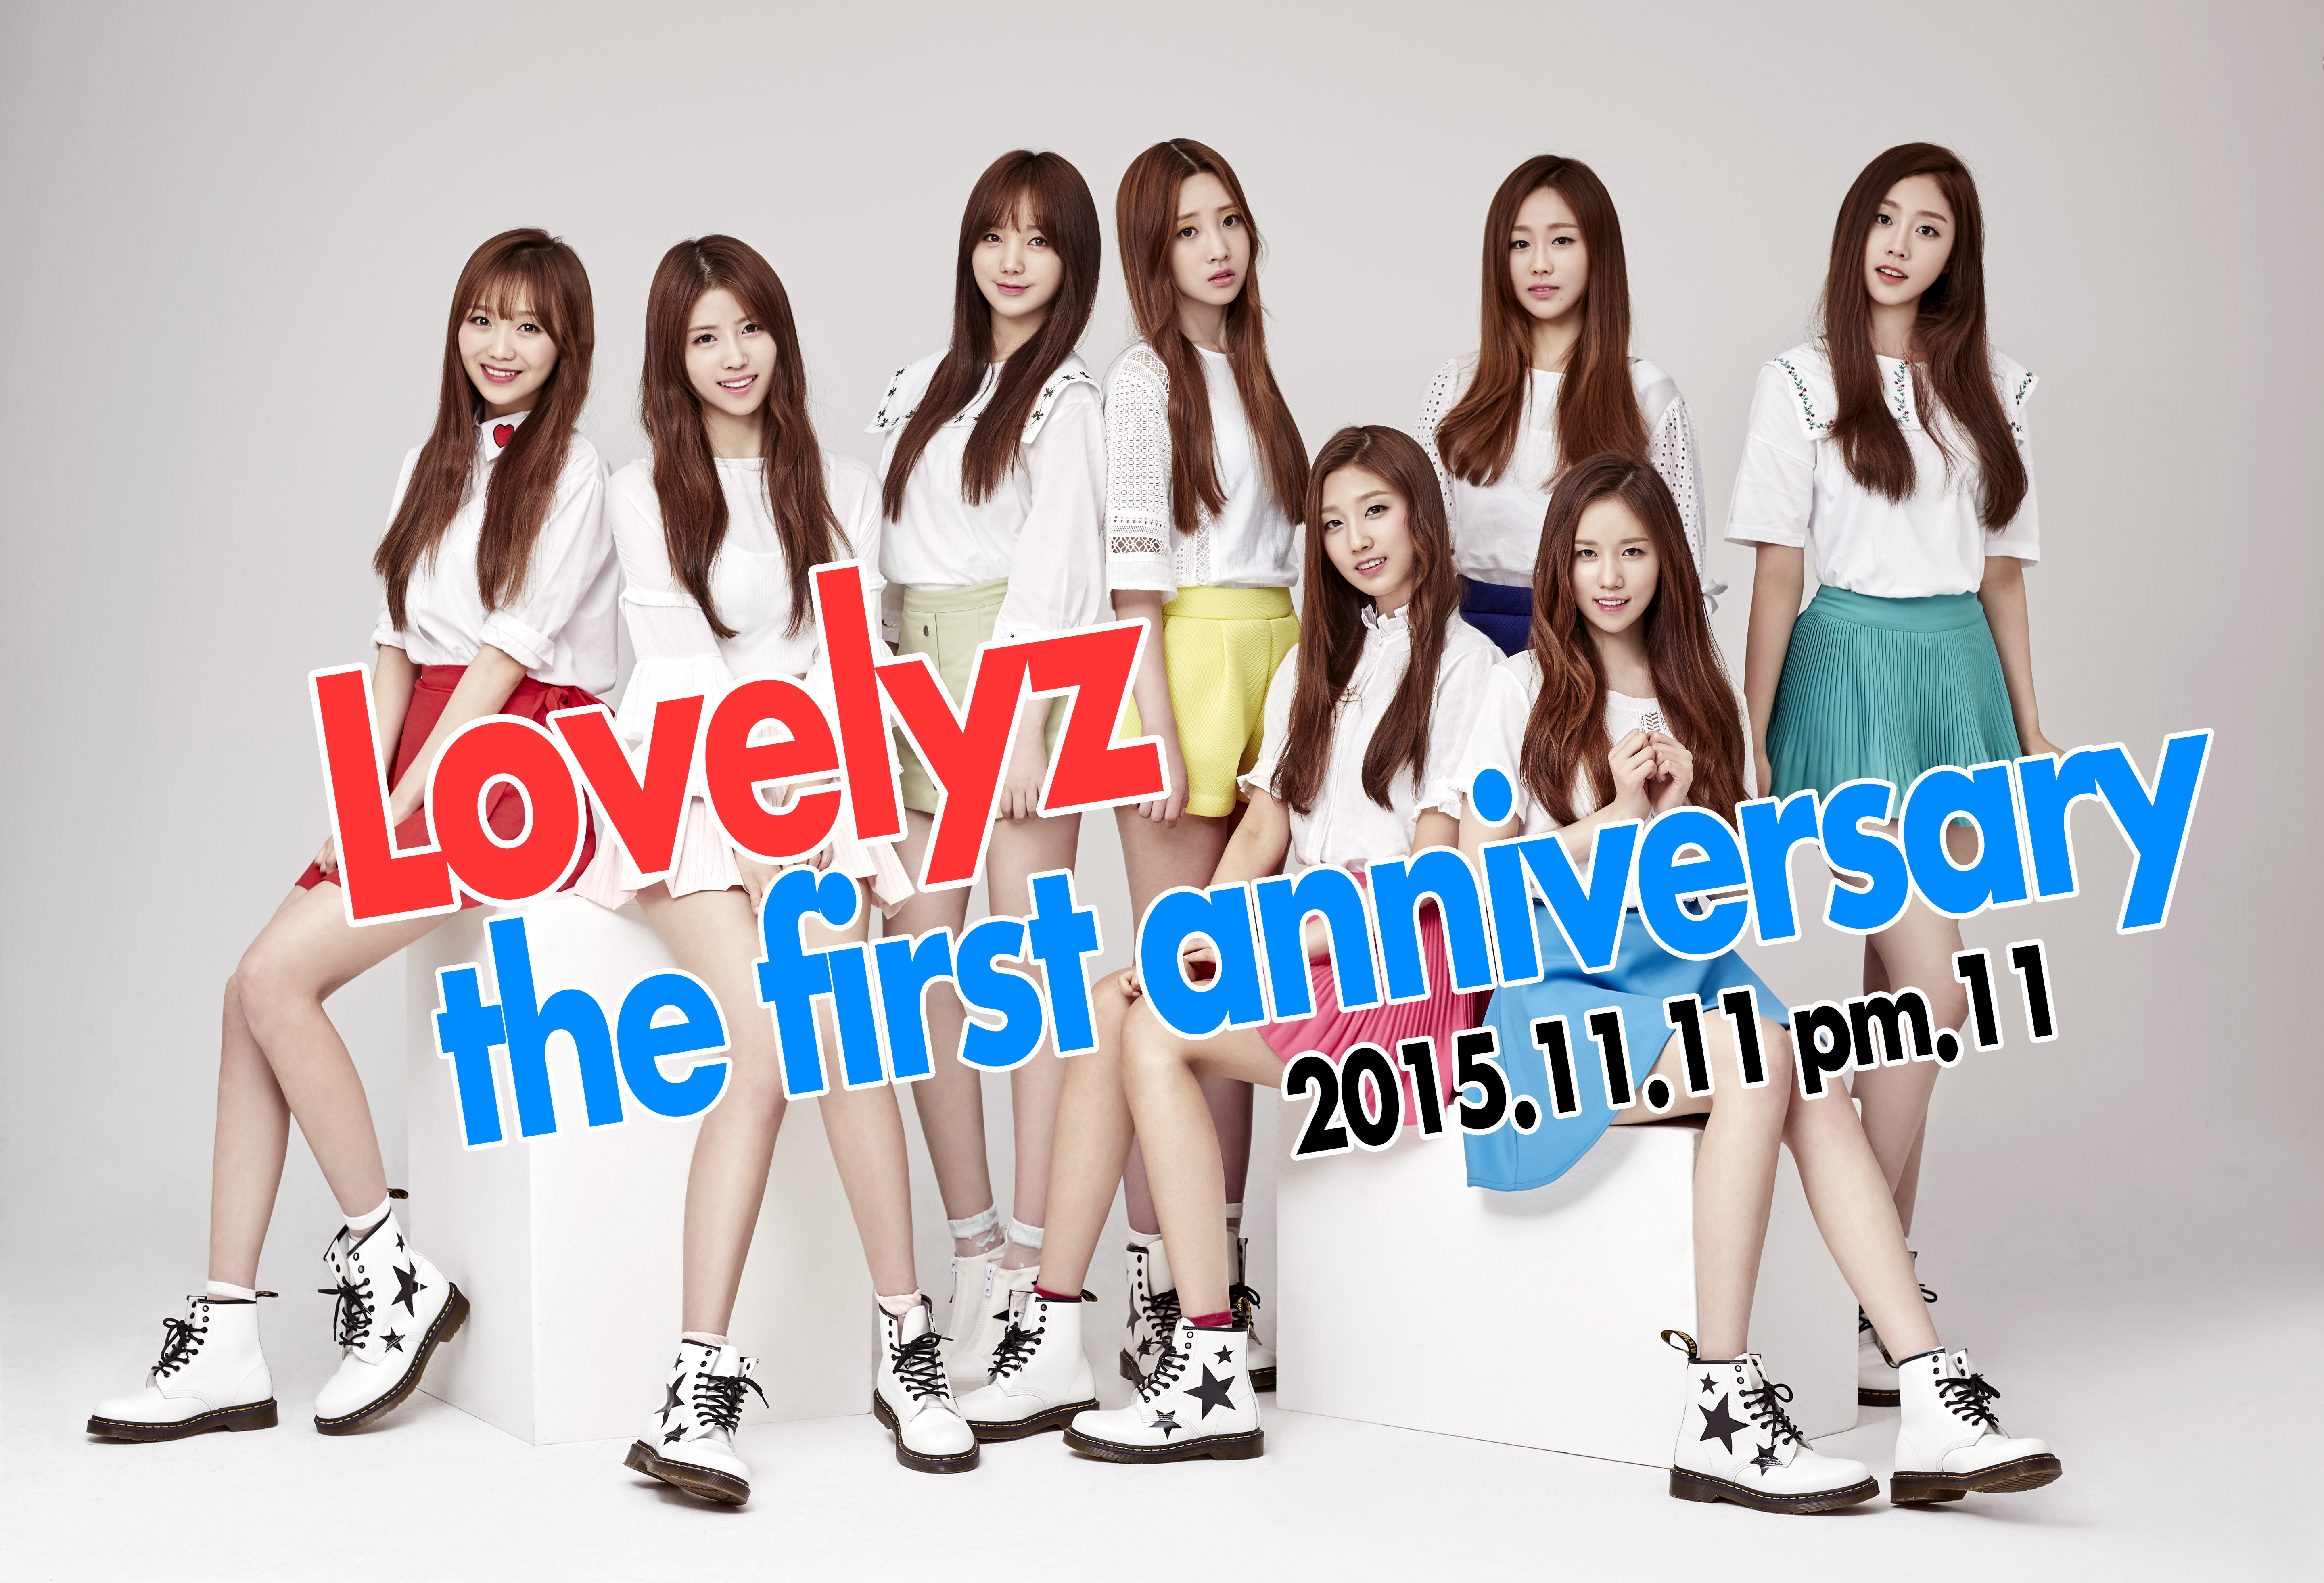 Lovelyz the 1st anniversary Party